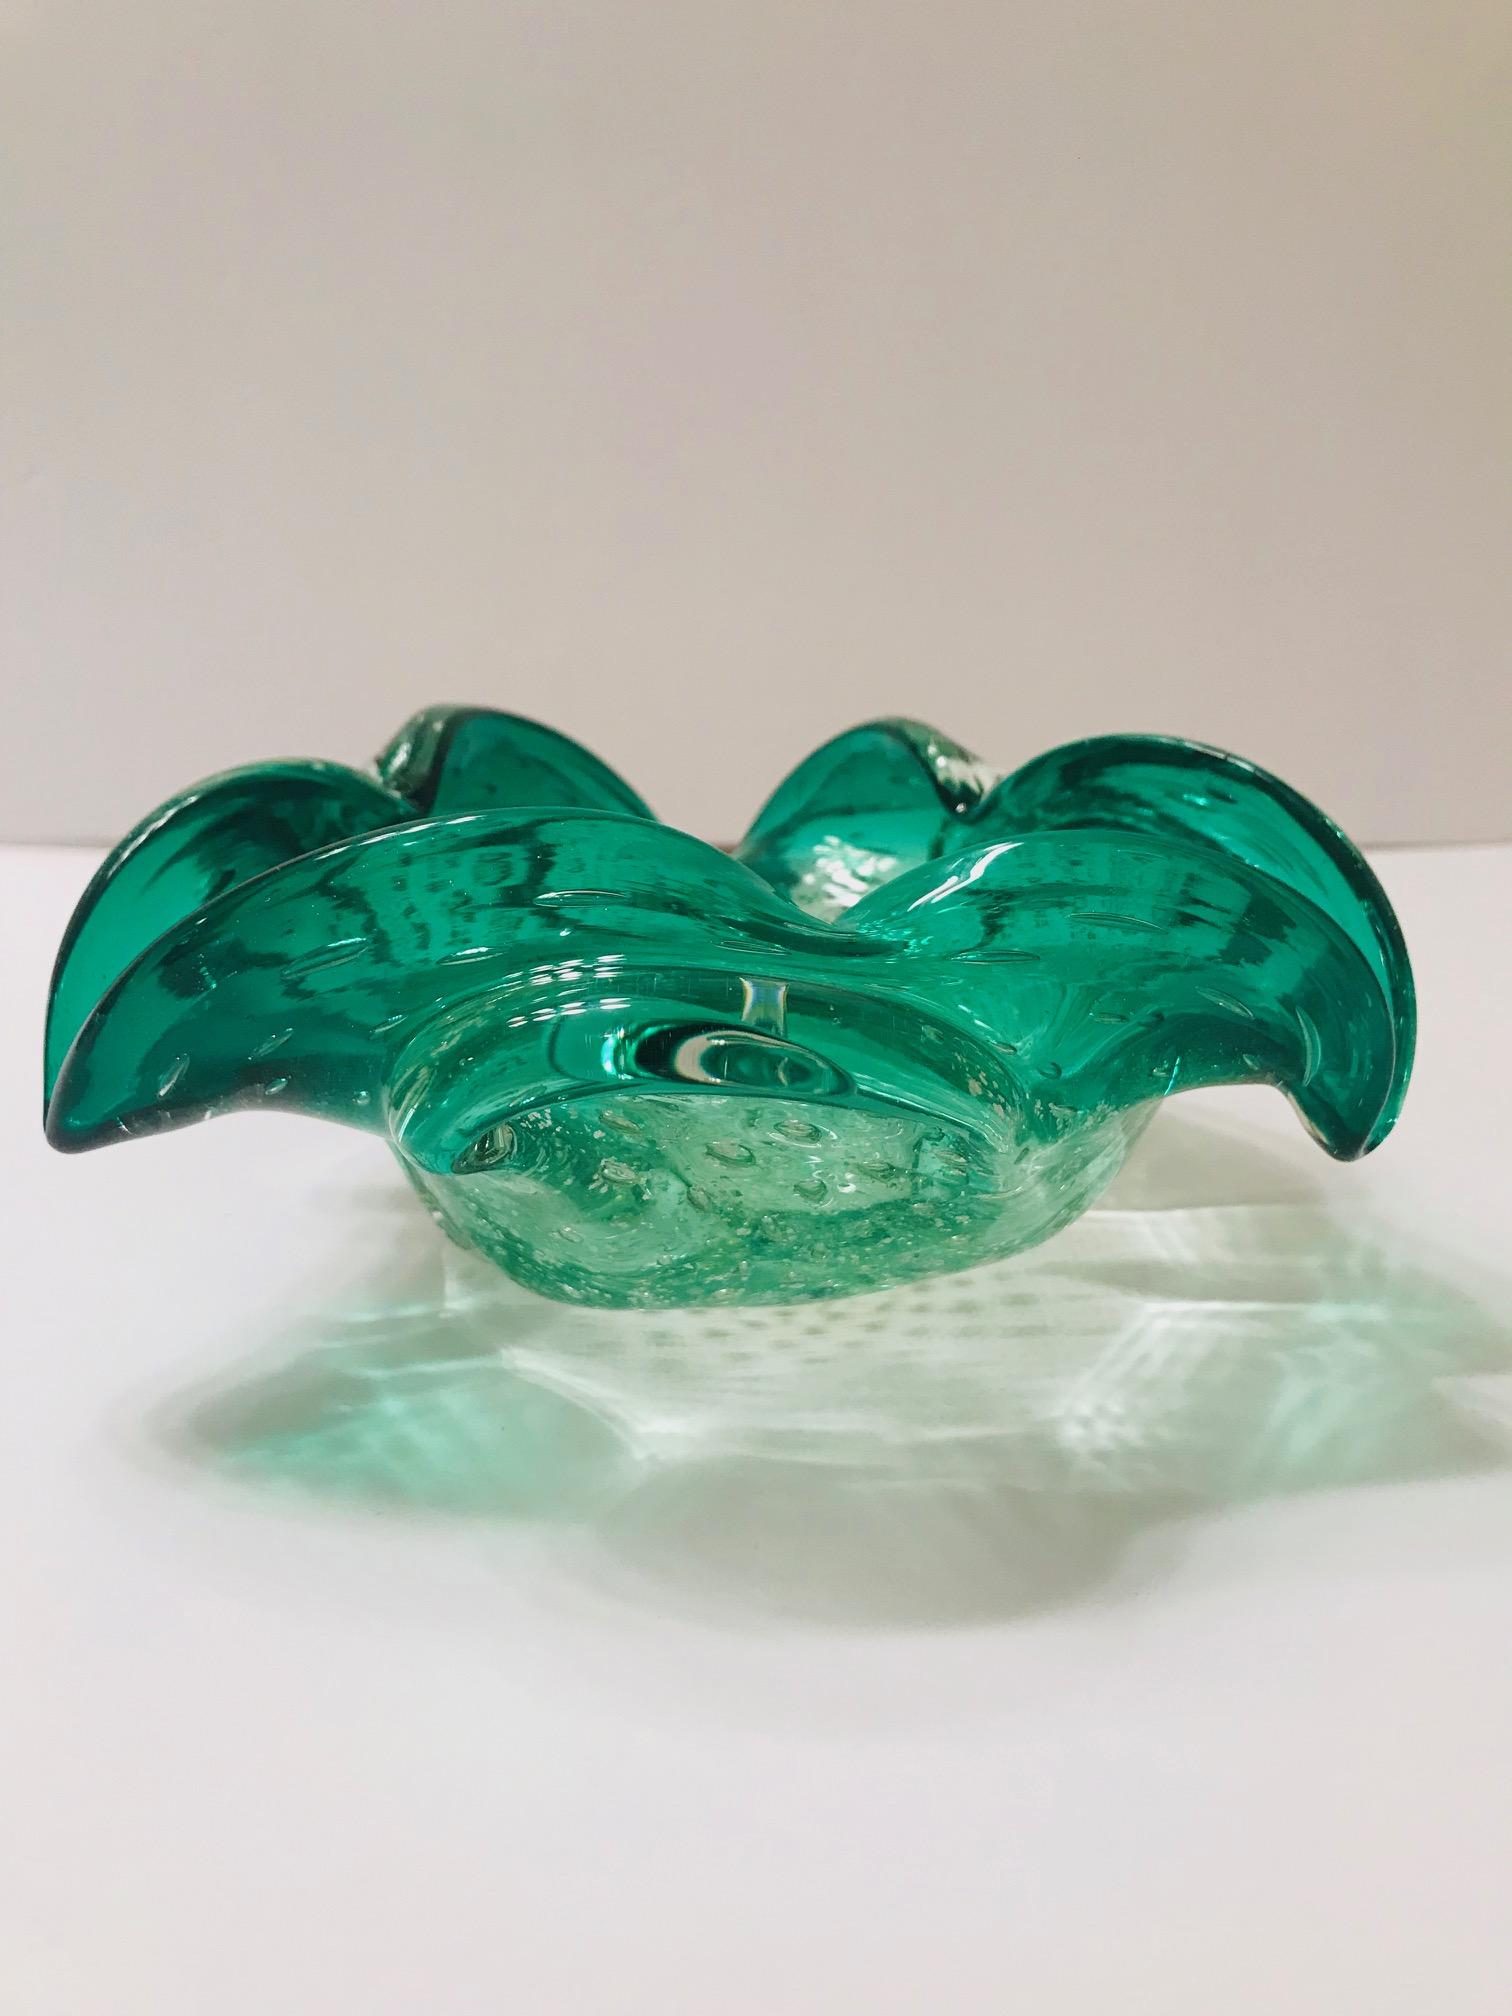 Hand-Crafted Mid-Century Modern Murano Ashtray or Bowl N Emerald Green, Italy, circa 1950s